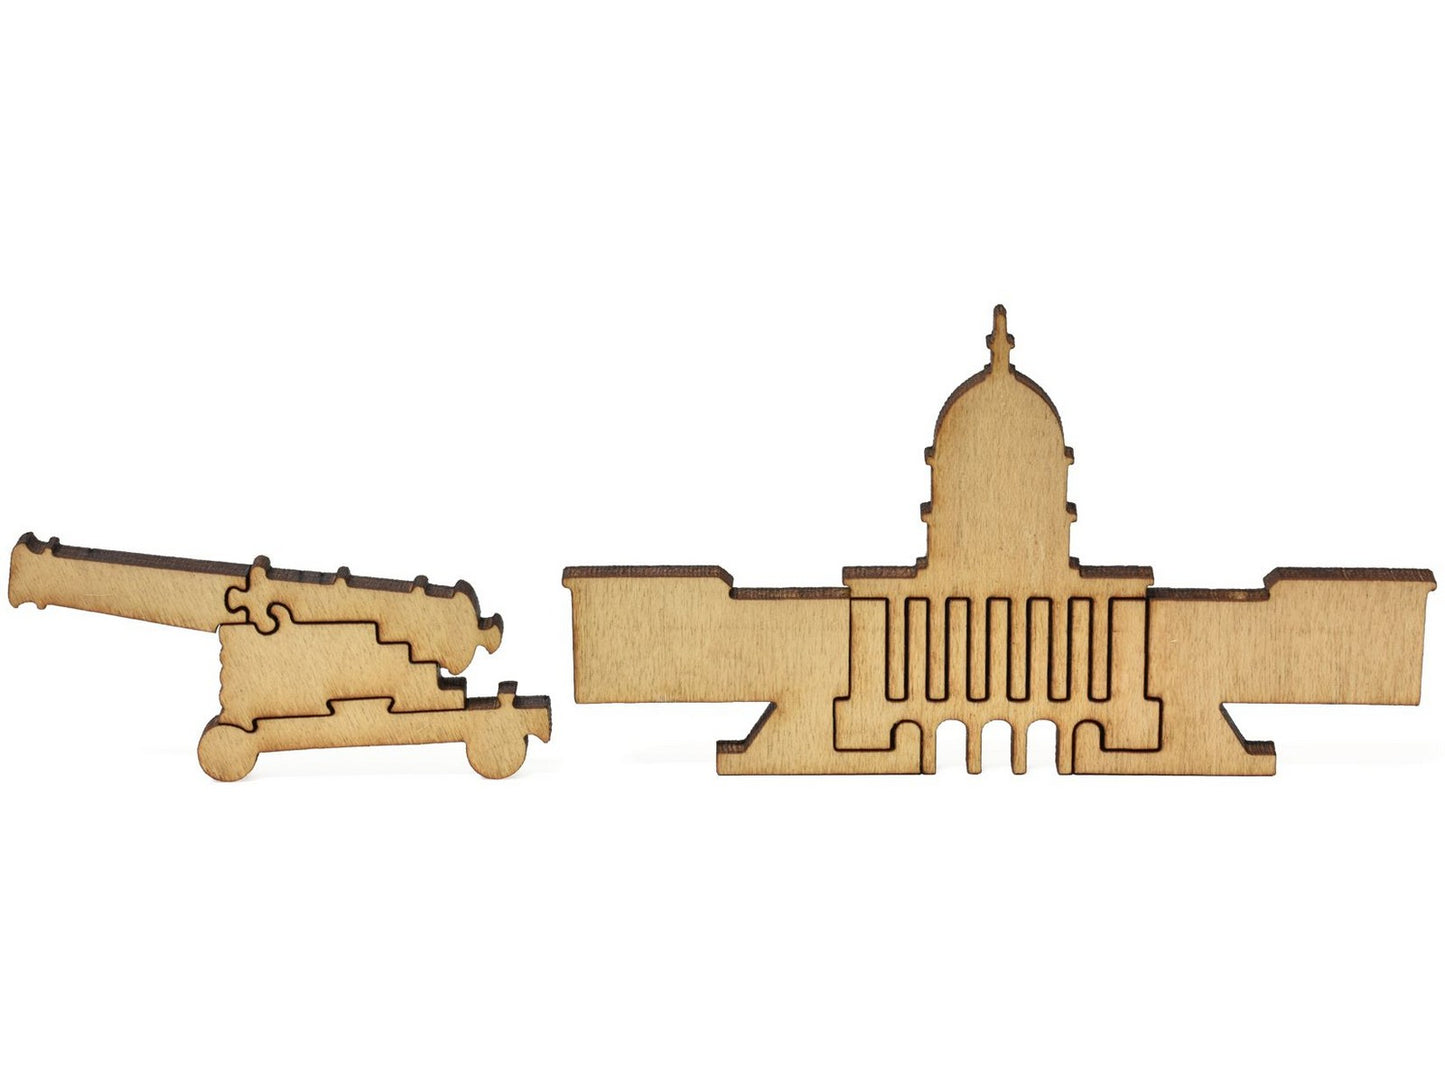 A closeup of pieces that shows the state capitol and a cannon.